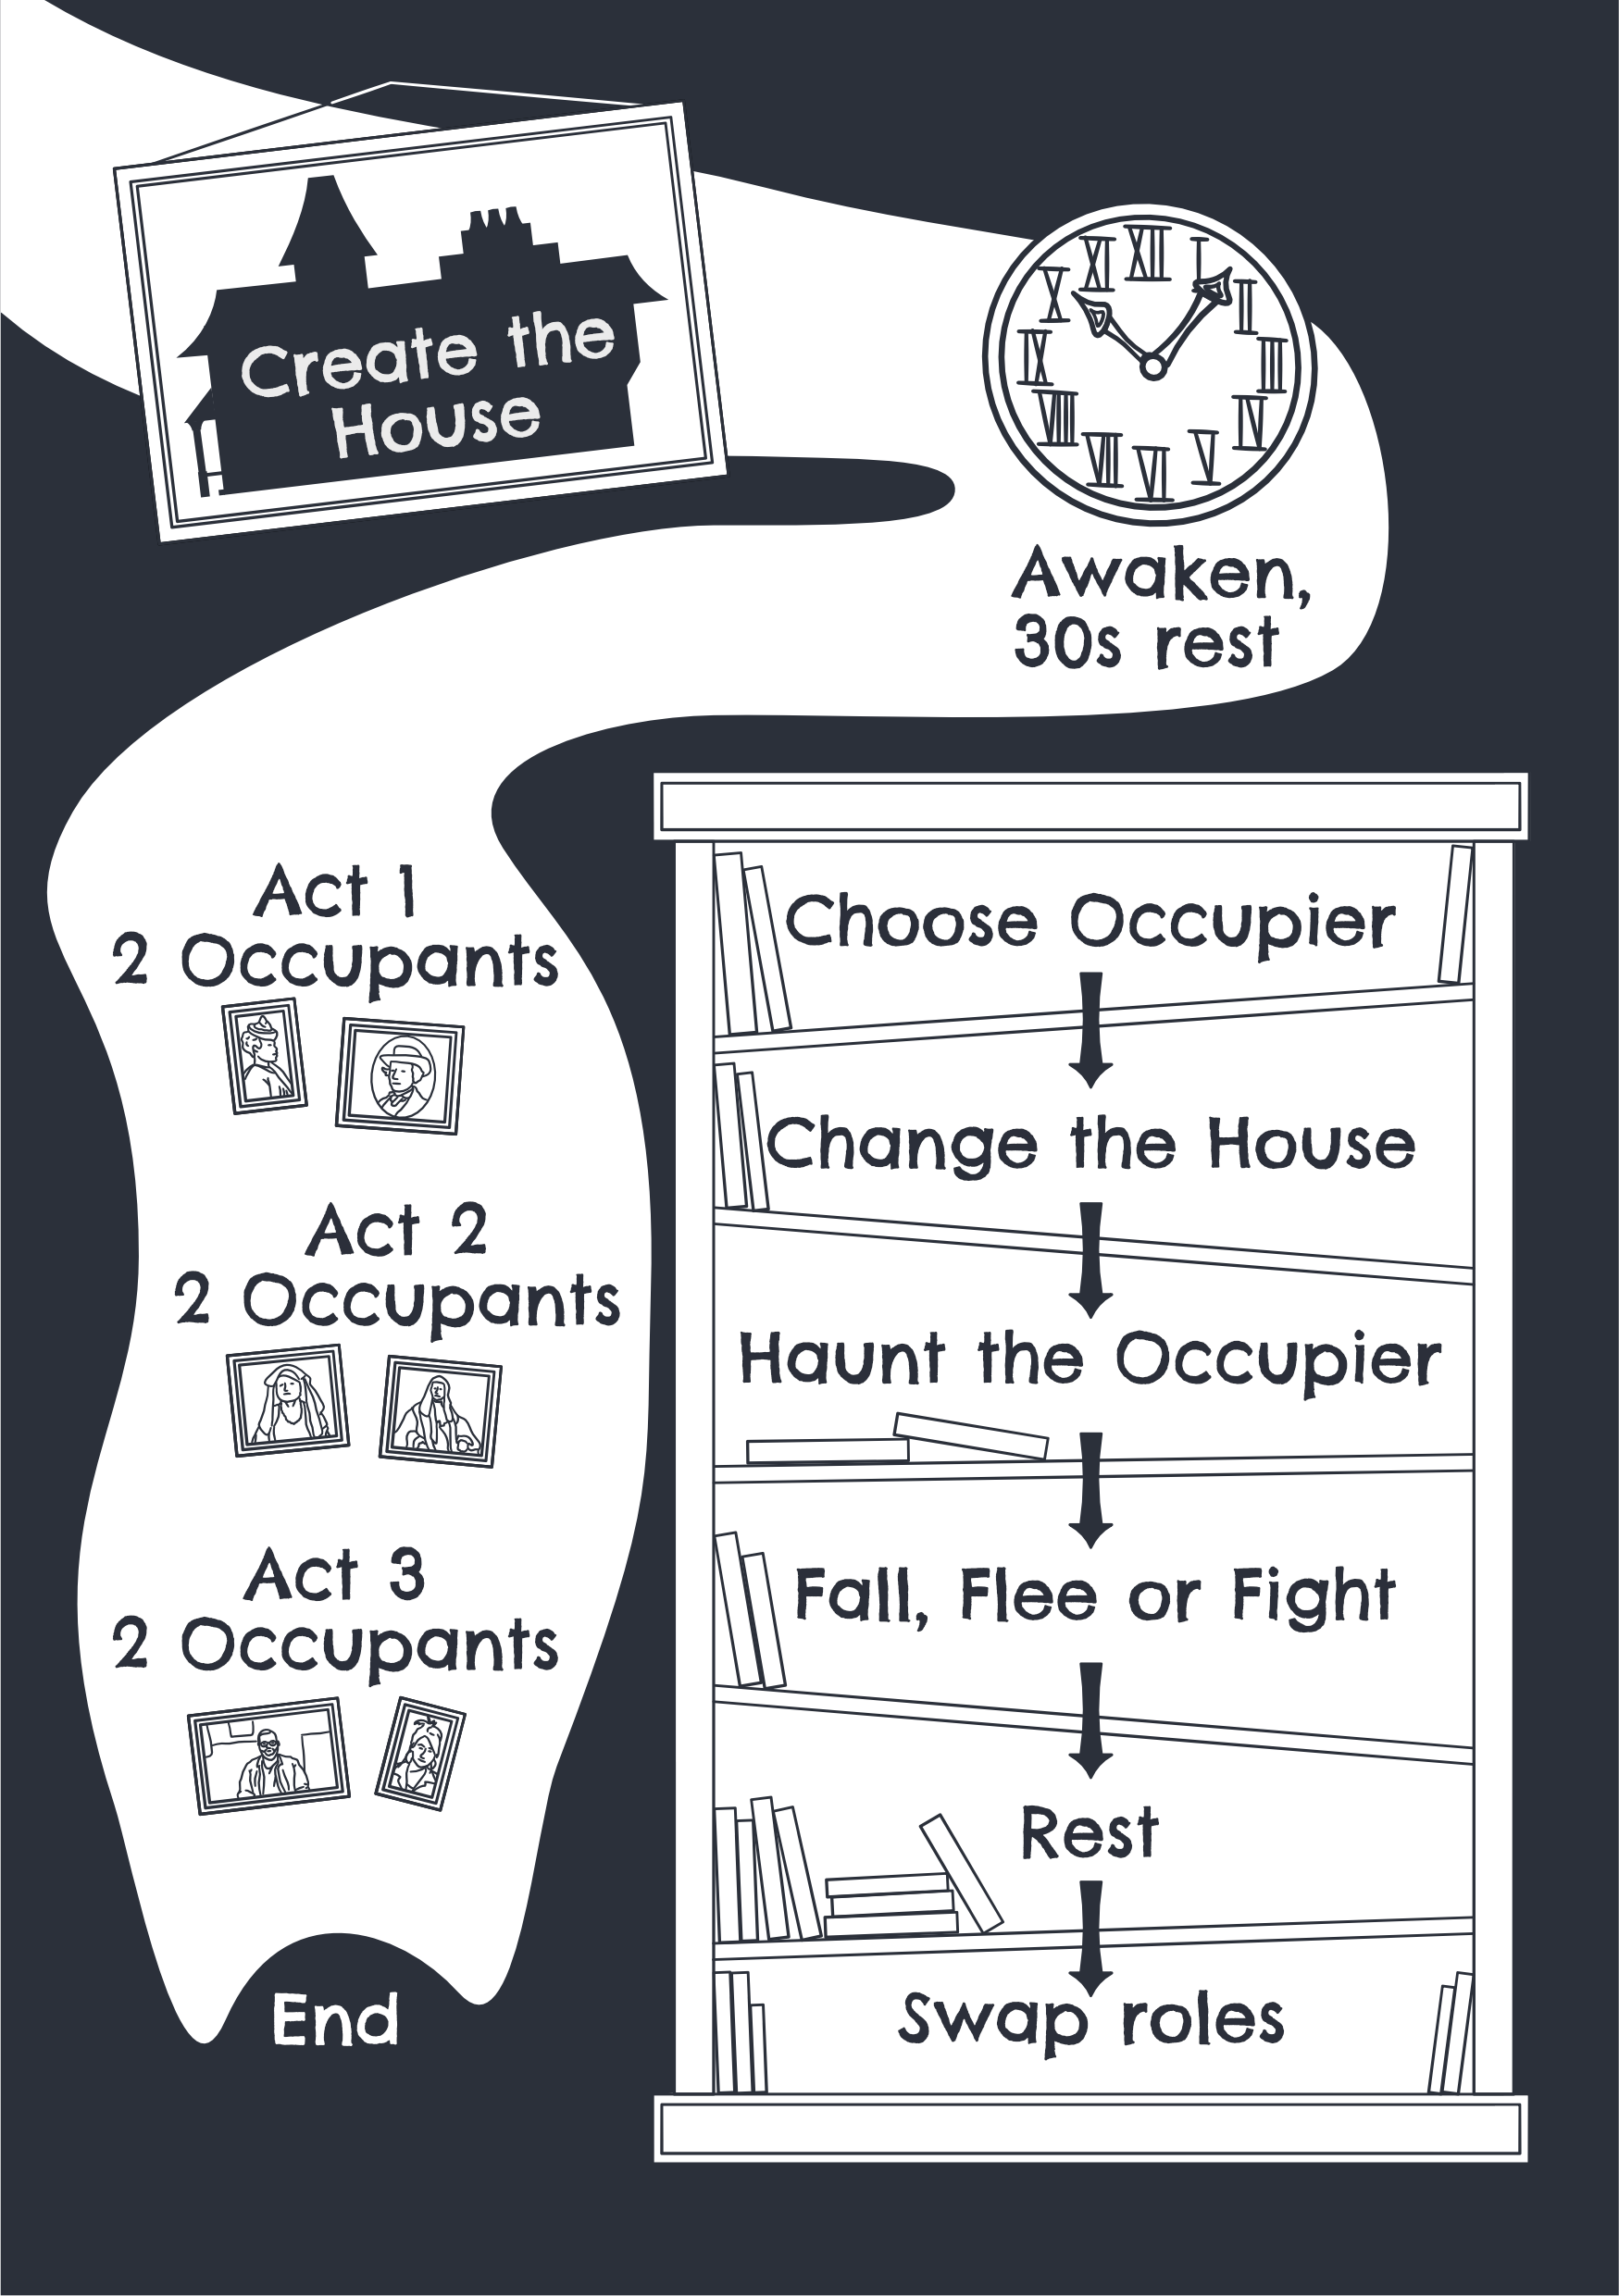 A flowchart shows the gameplay loop of Haunting, from creating the house to living out the lives of the occupants.